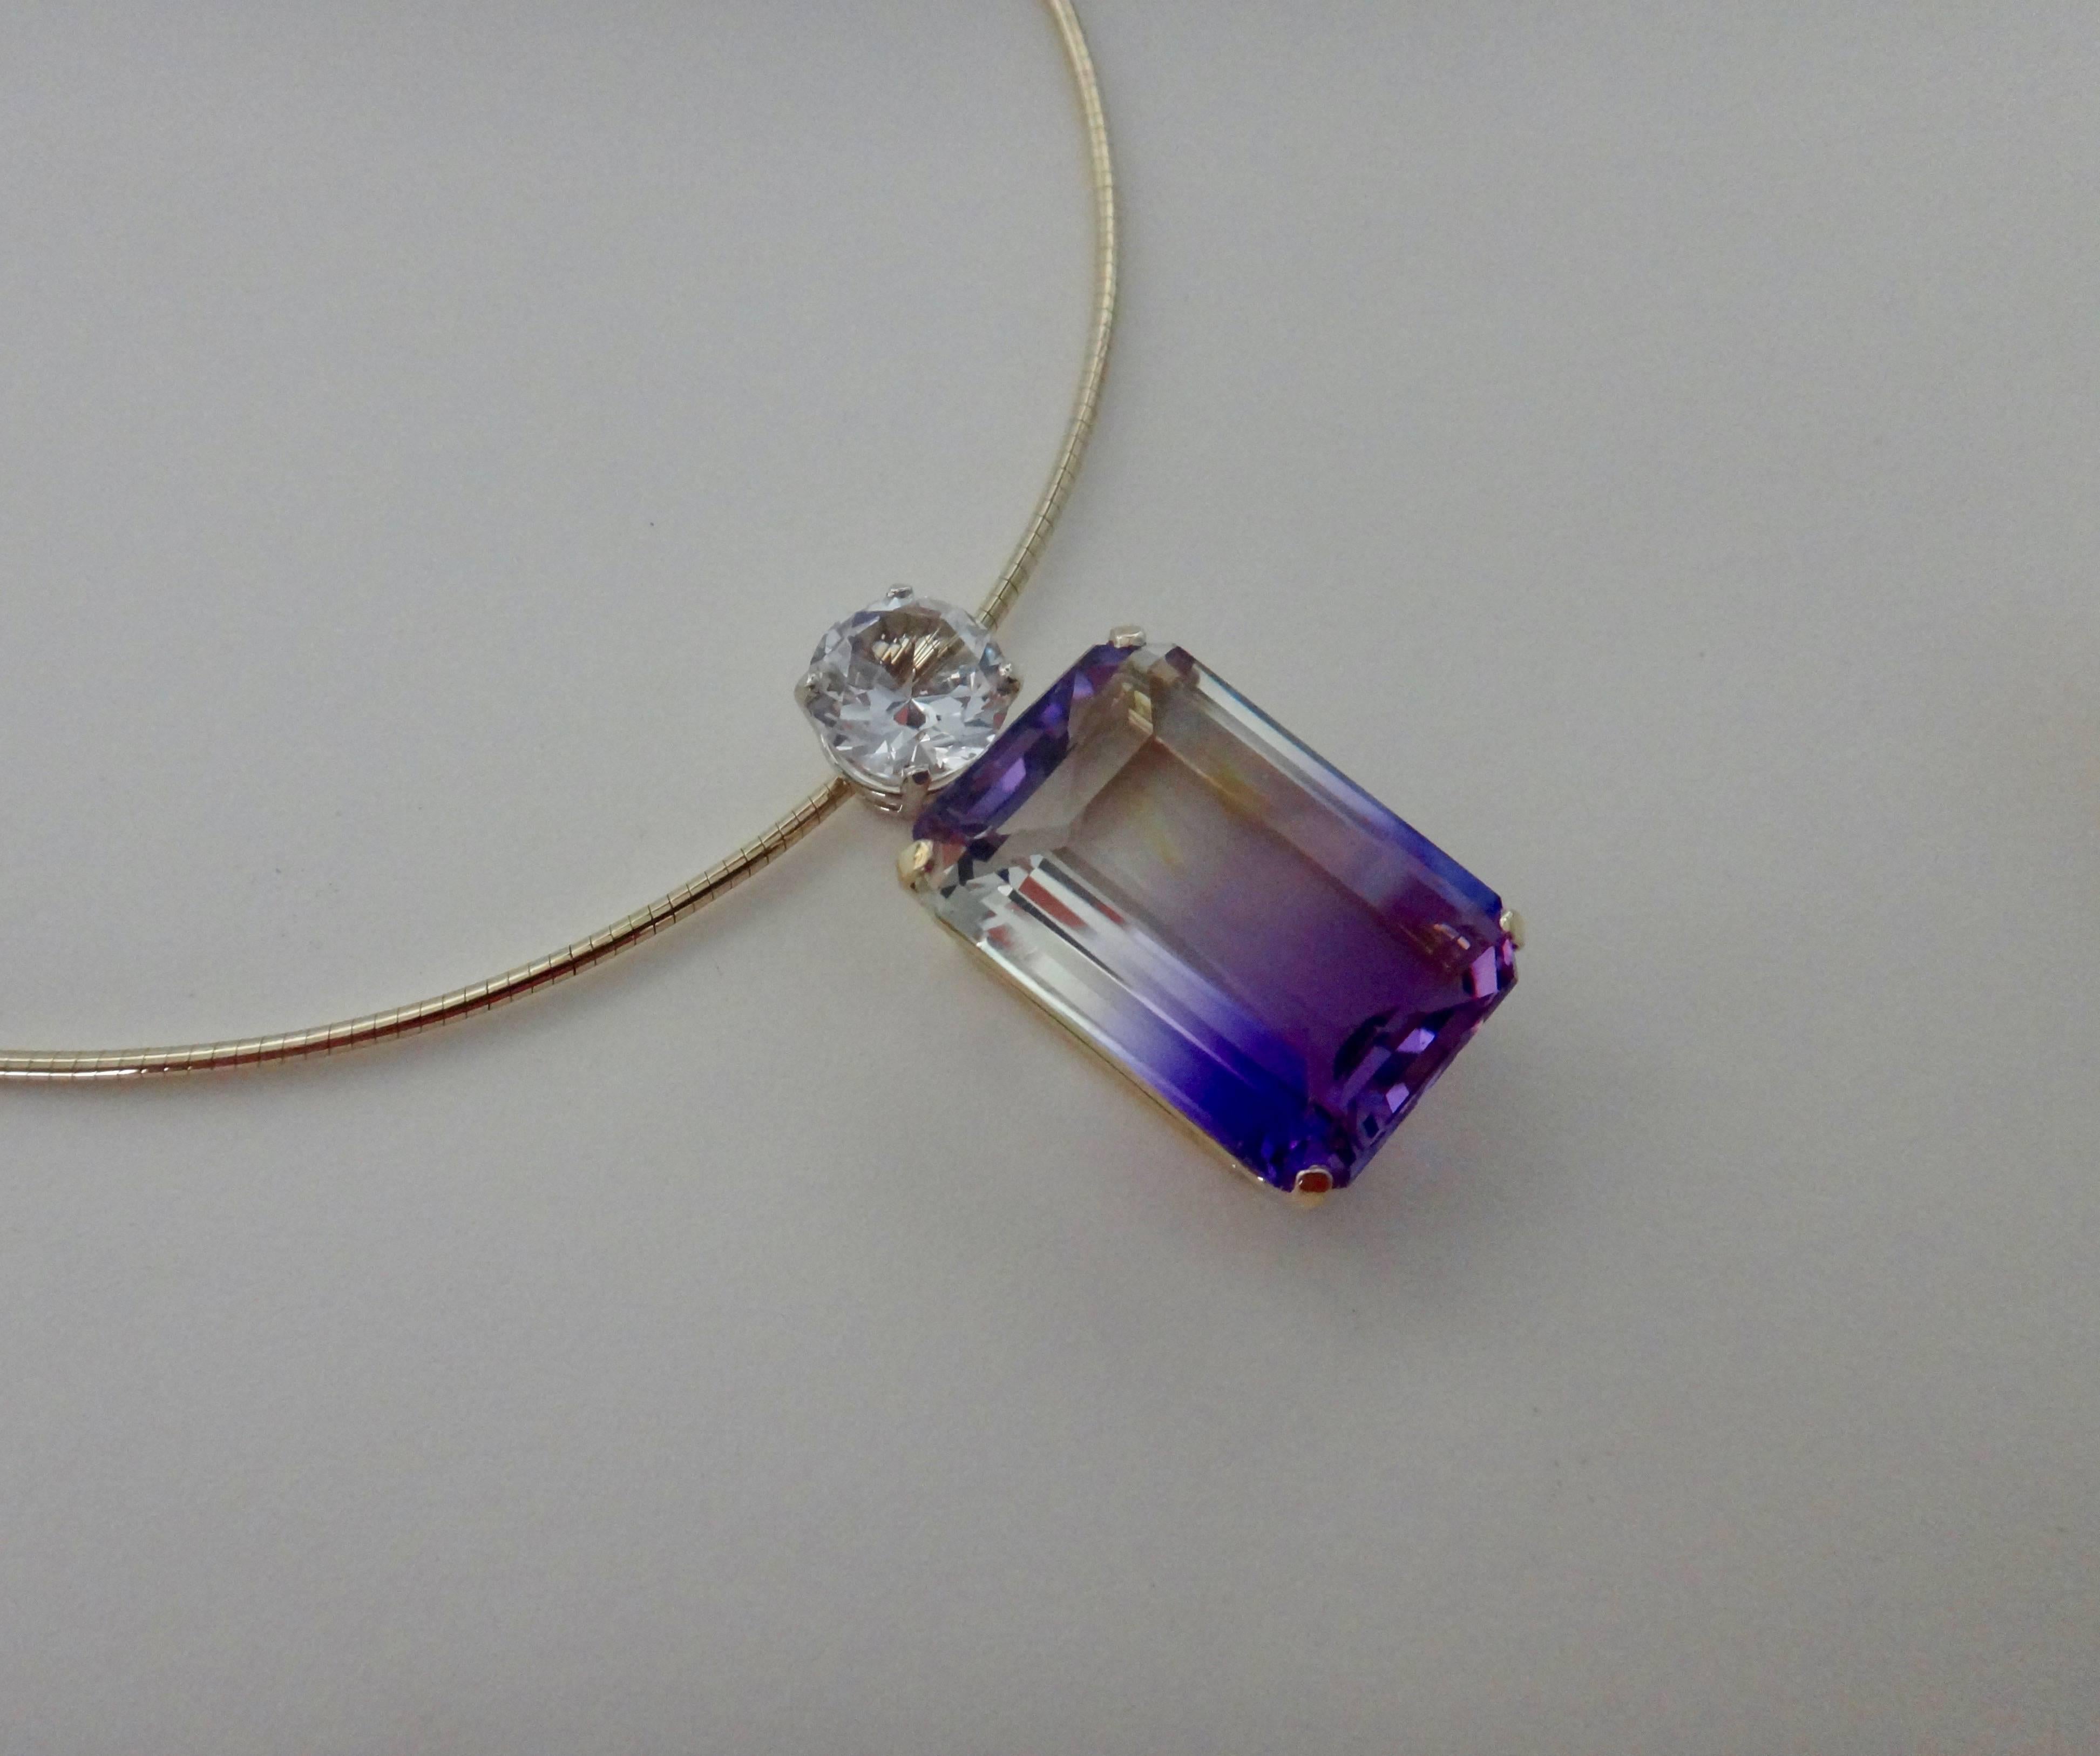 An emerald cut ametrine (origin: Bolivia) of 35 carats is the featured attraction in this one-of-a-kind pendant.  The gem is unusual in that it's purple and clear rather than the more common purple and gold.  The ametrine is well cut, polished and